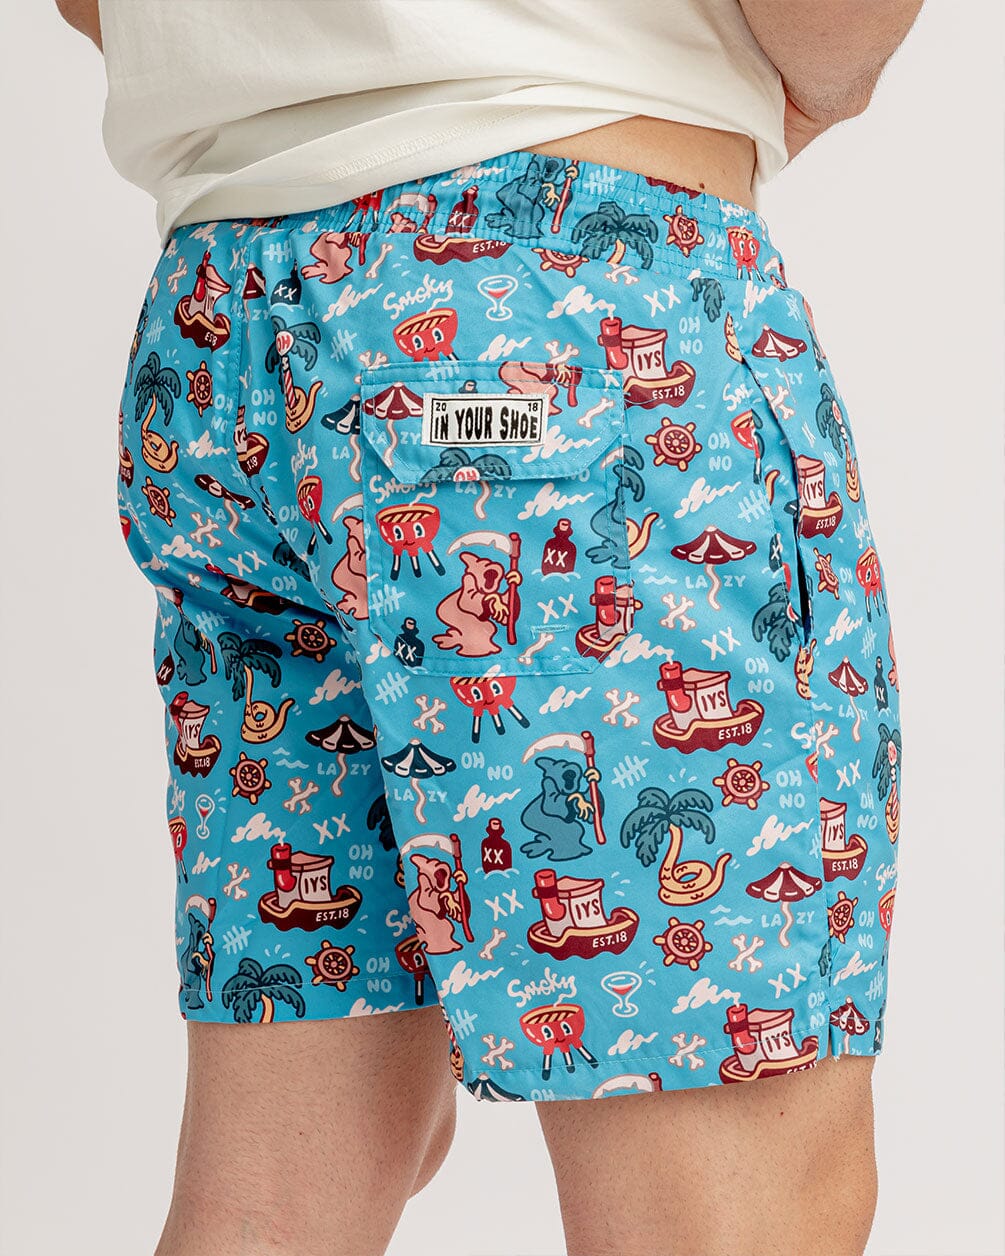 Turquoise Sea Ghost - Swim Shorts Swim Shorts IN YOUR SHOE 